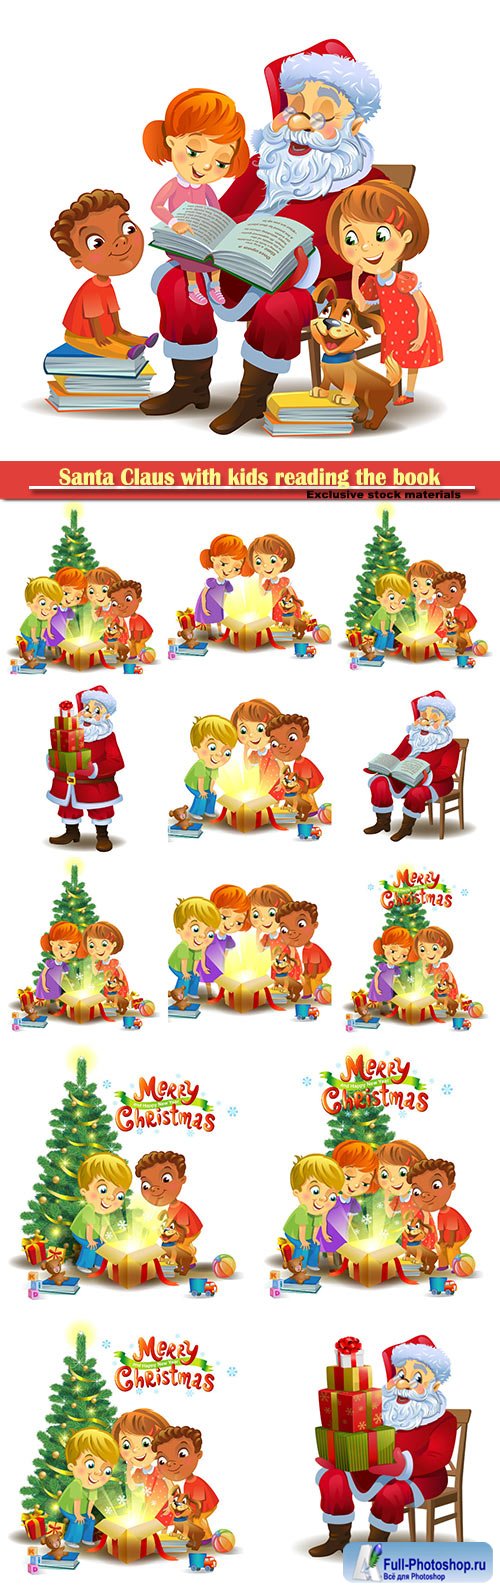 Santa Claus with kids reading the book vector illustration